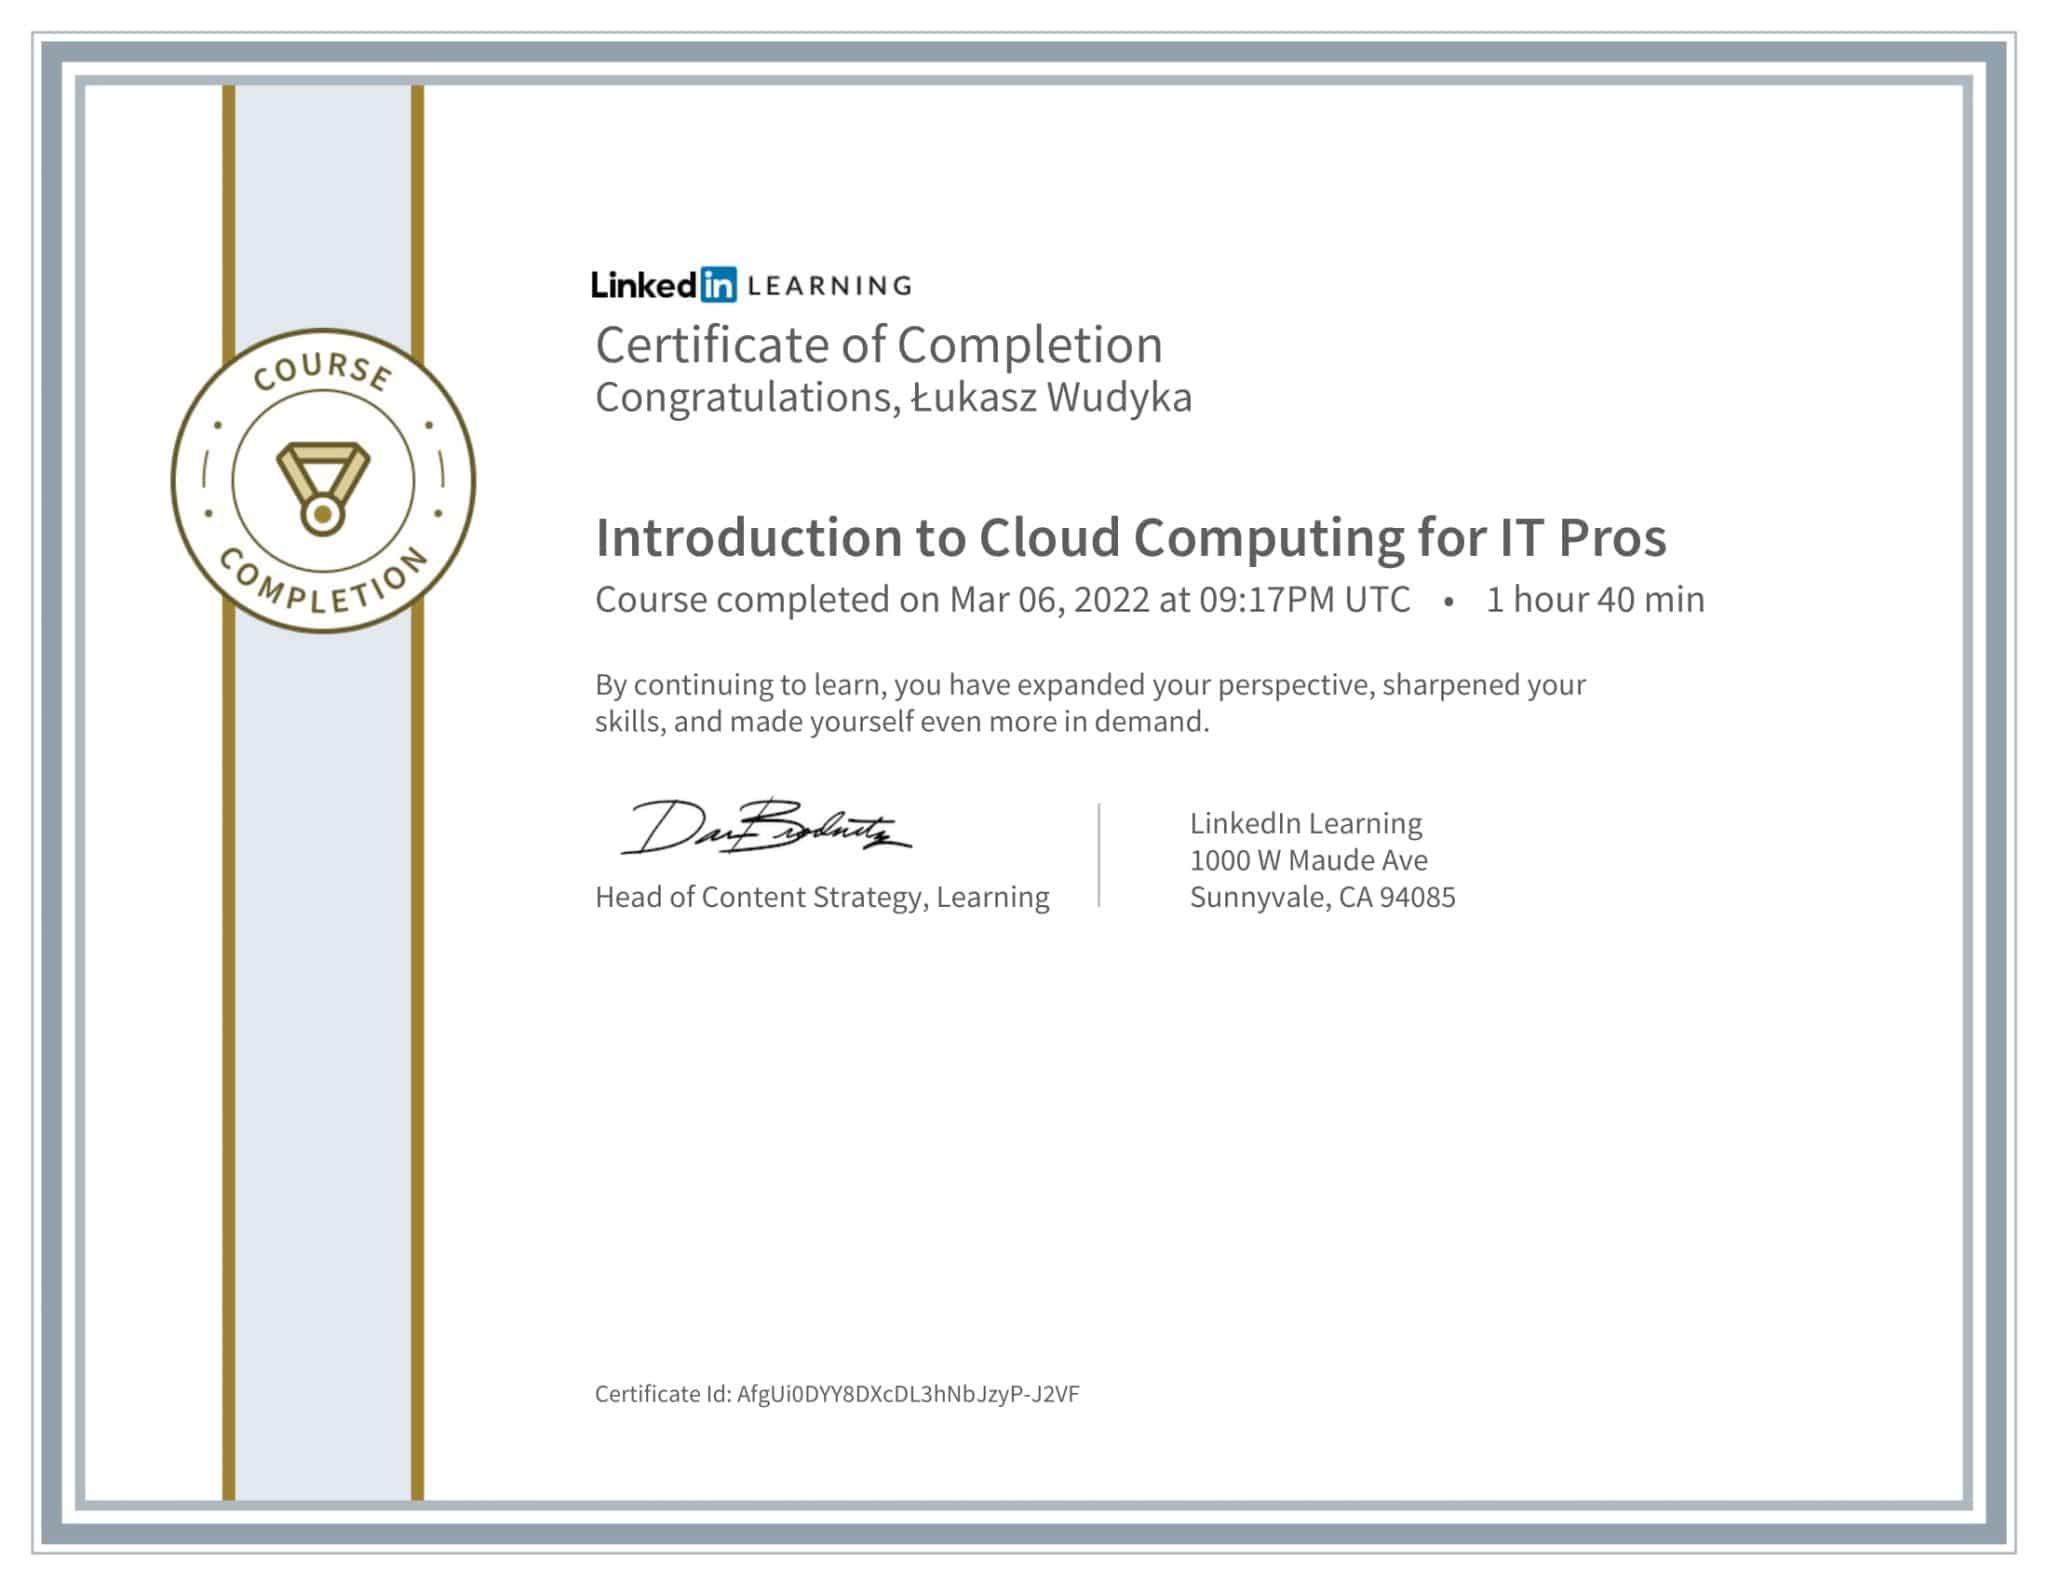 CertificateOfCompletion_Introduction to Cloud Computing for IT Pros-1